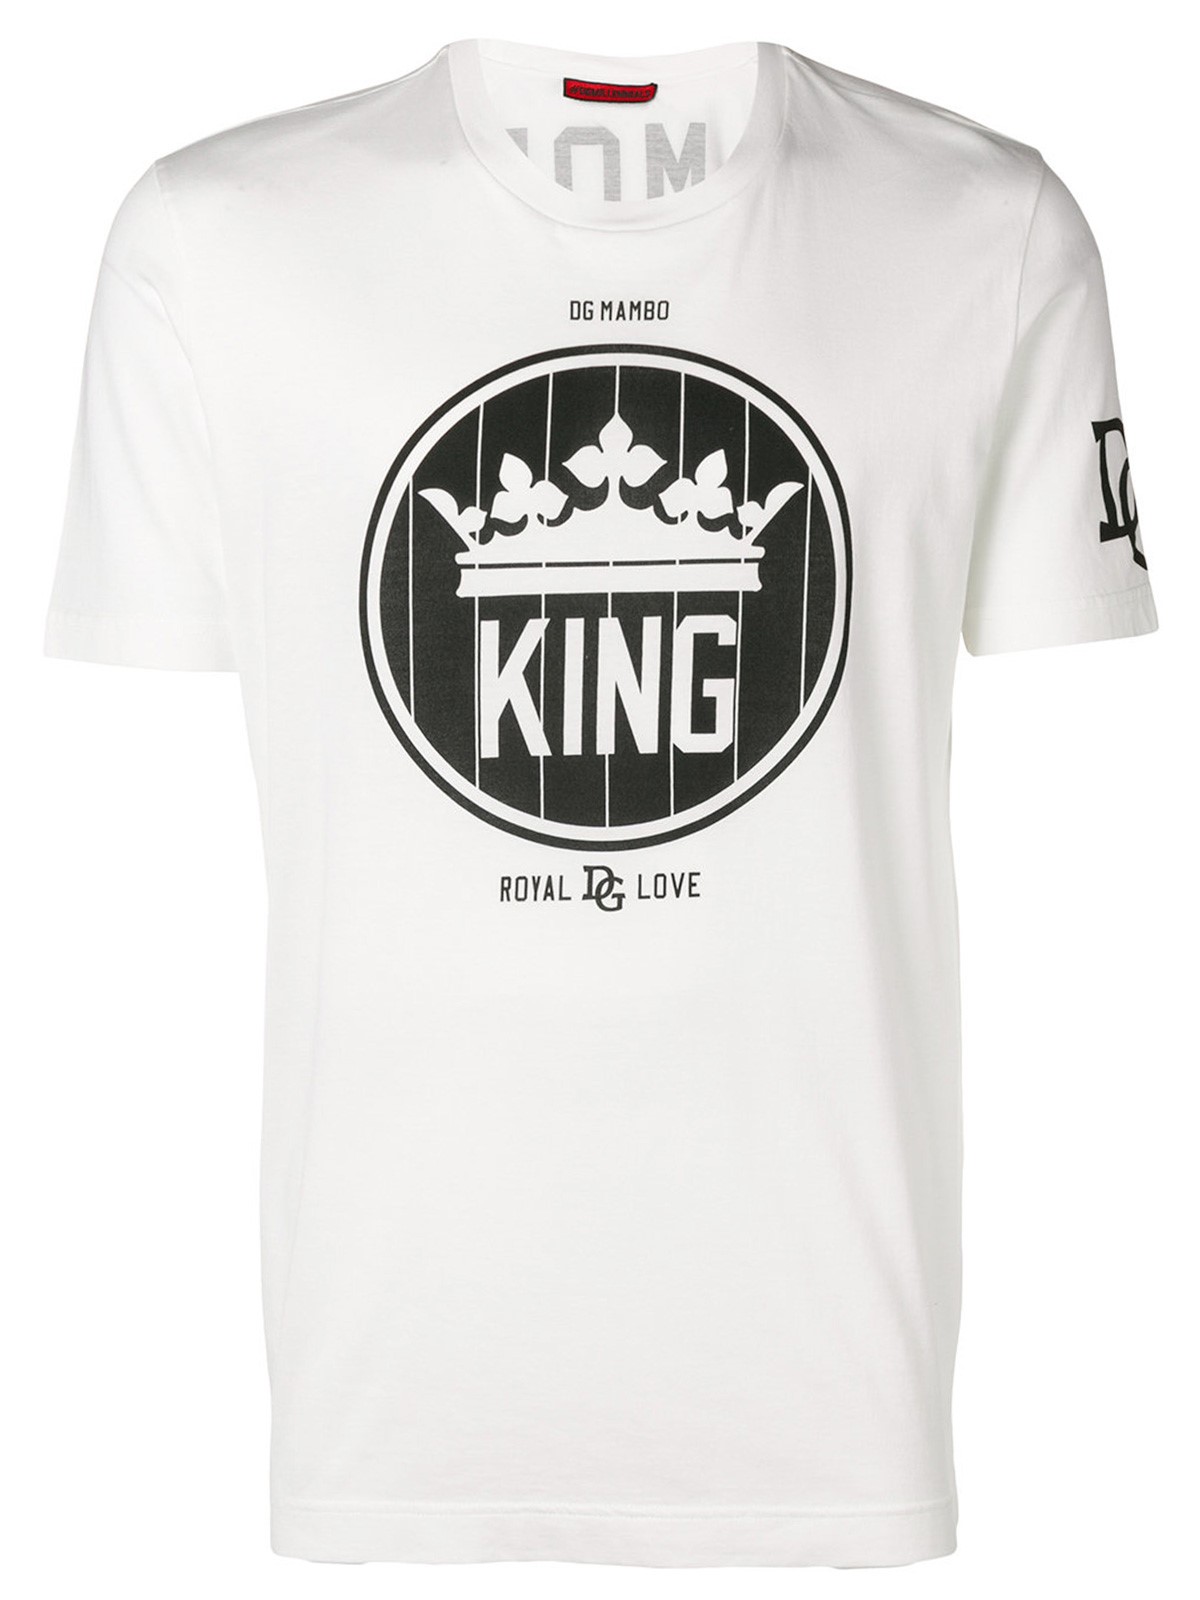 dolce & gabbana KING CREW PRINT T-SHIRT available on montiboutique.com ...